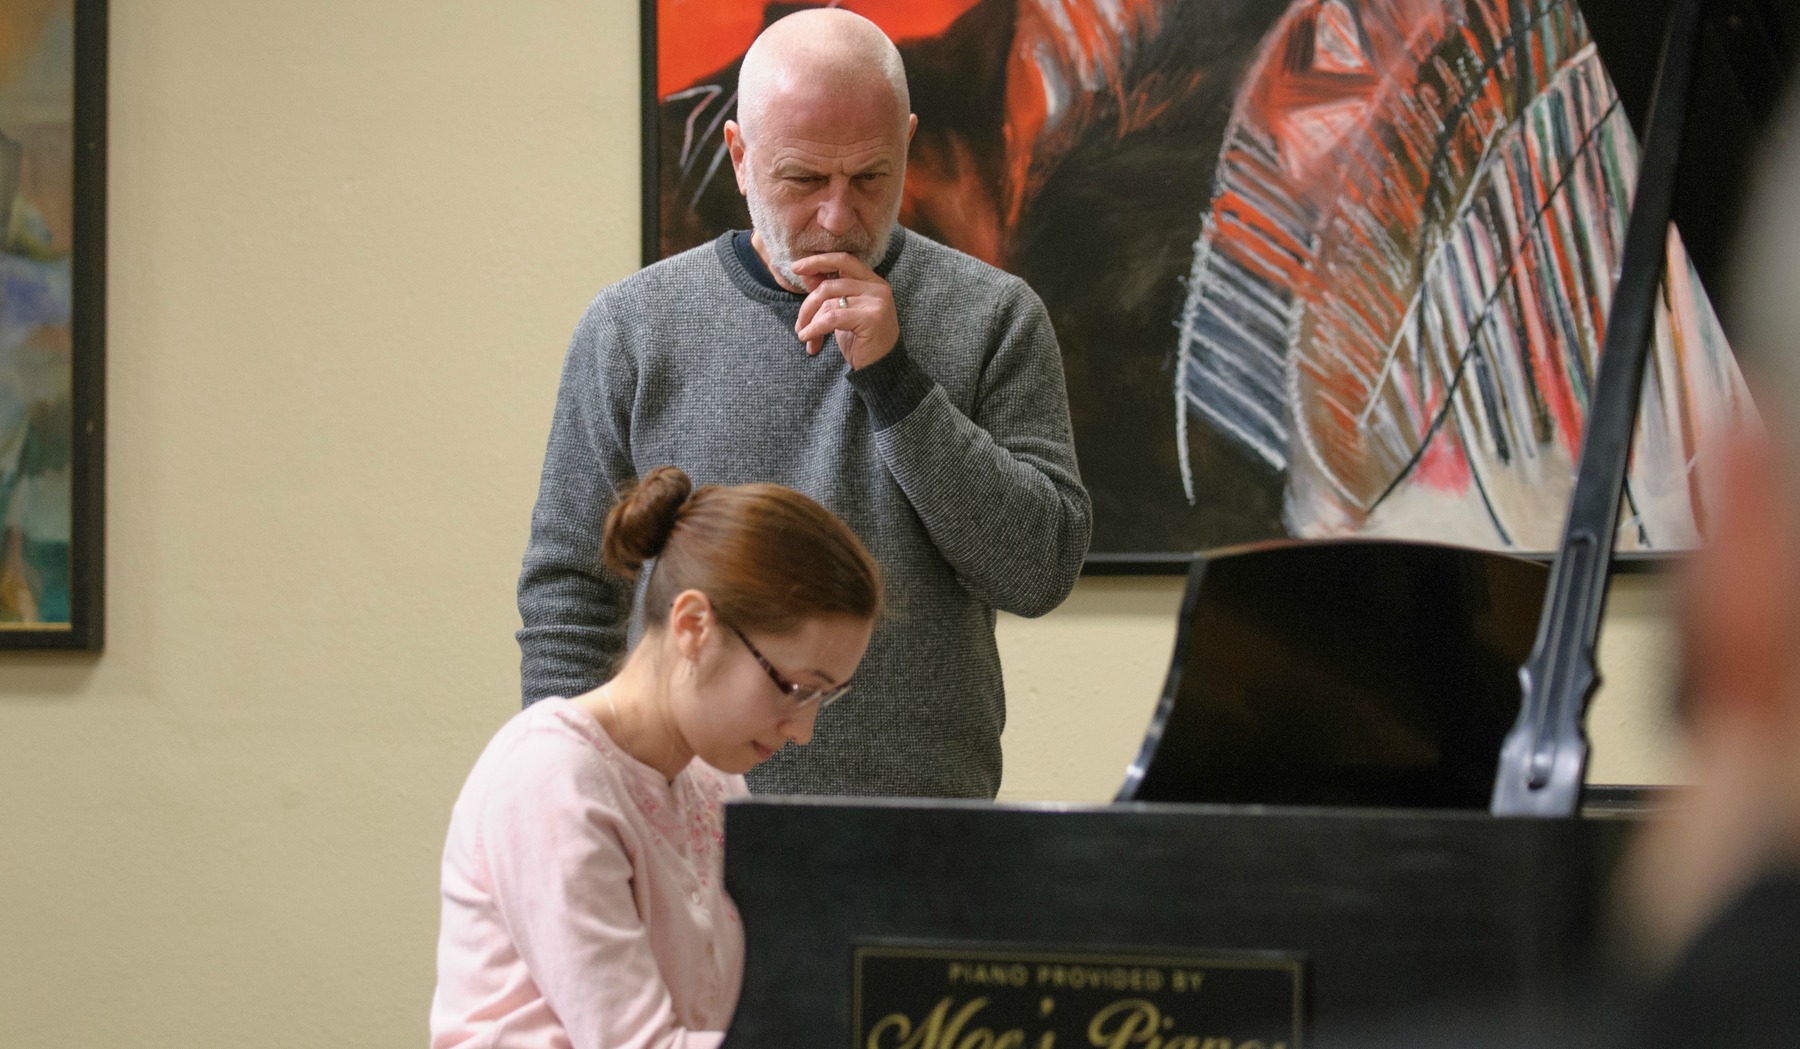 Natalie Burton ’13 plays a Bach piece on the piano for master pianist Vladimir Feltsman during Portland Piano International’s Up Close With the Masters series. (Photo courtesy of Portland Piano International)